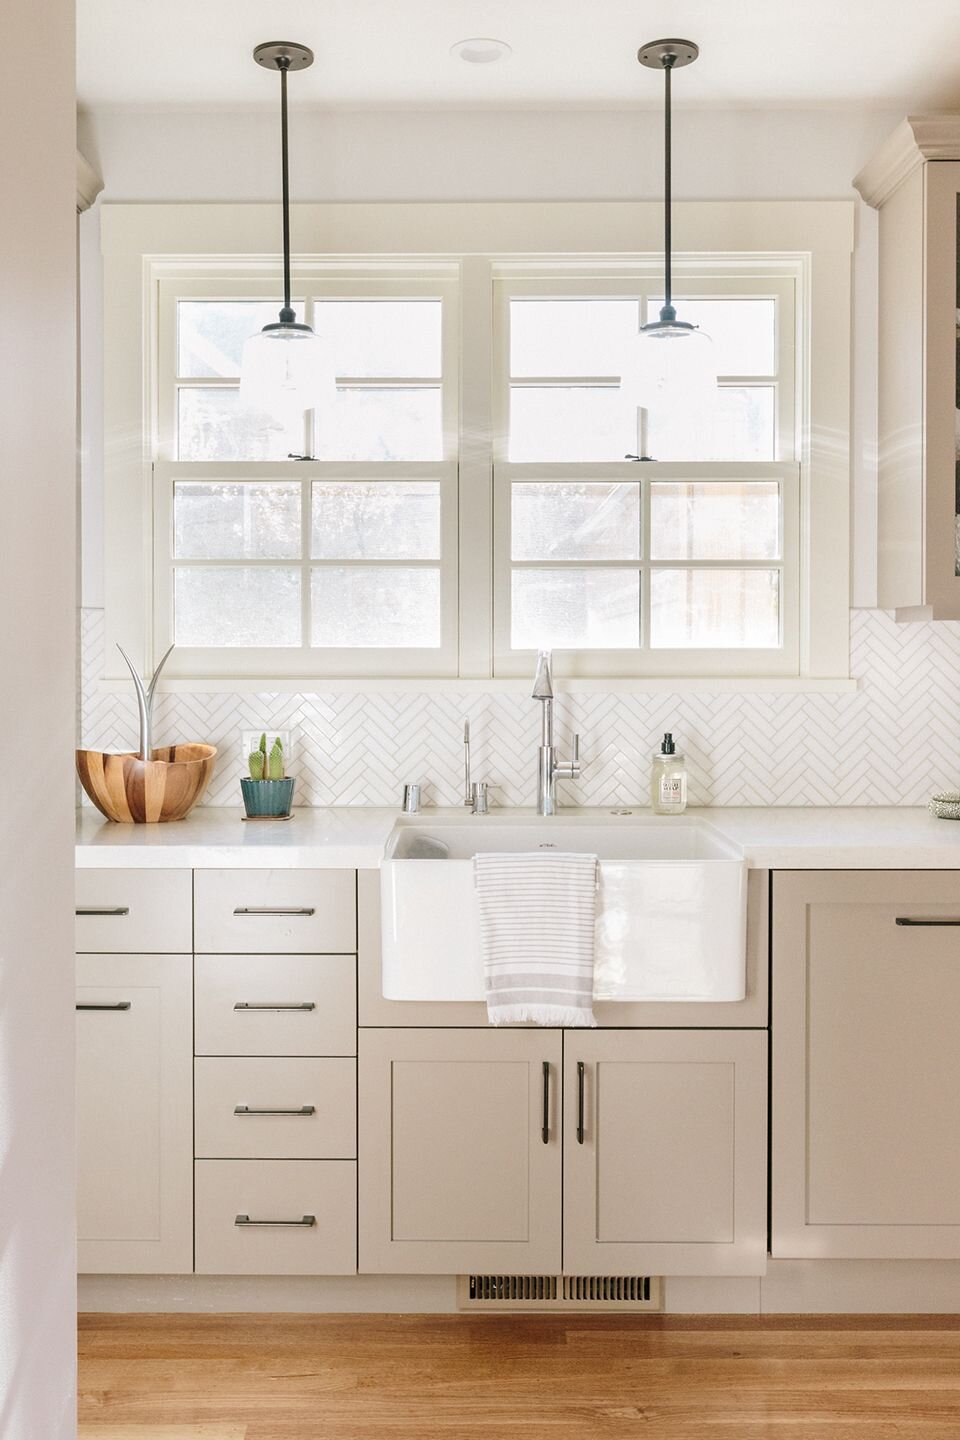 this is a white porcelain Belfast sink featured in a kitchen designed by nina jizhar